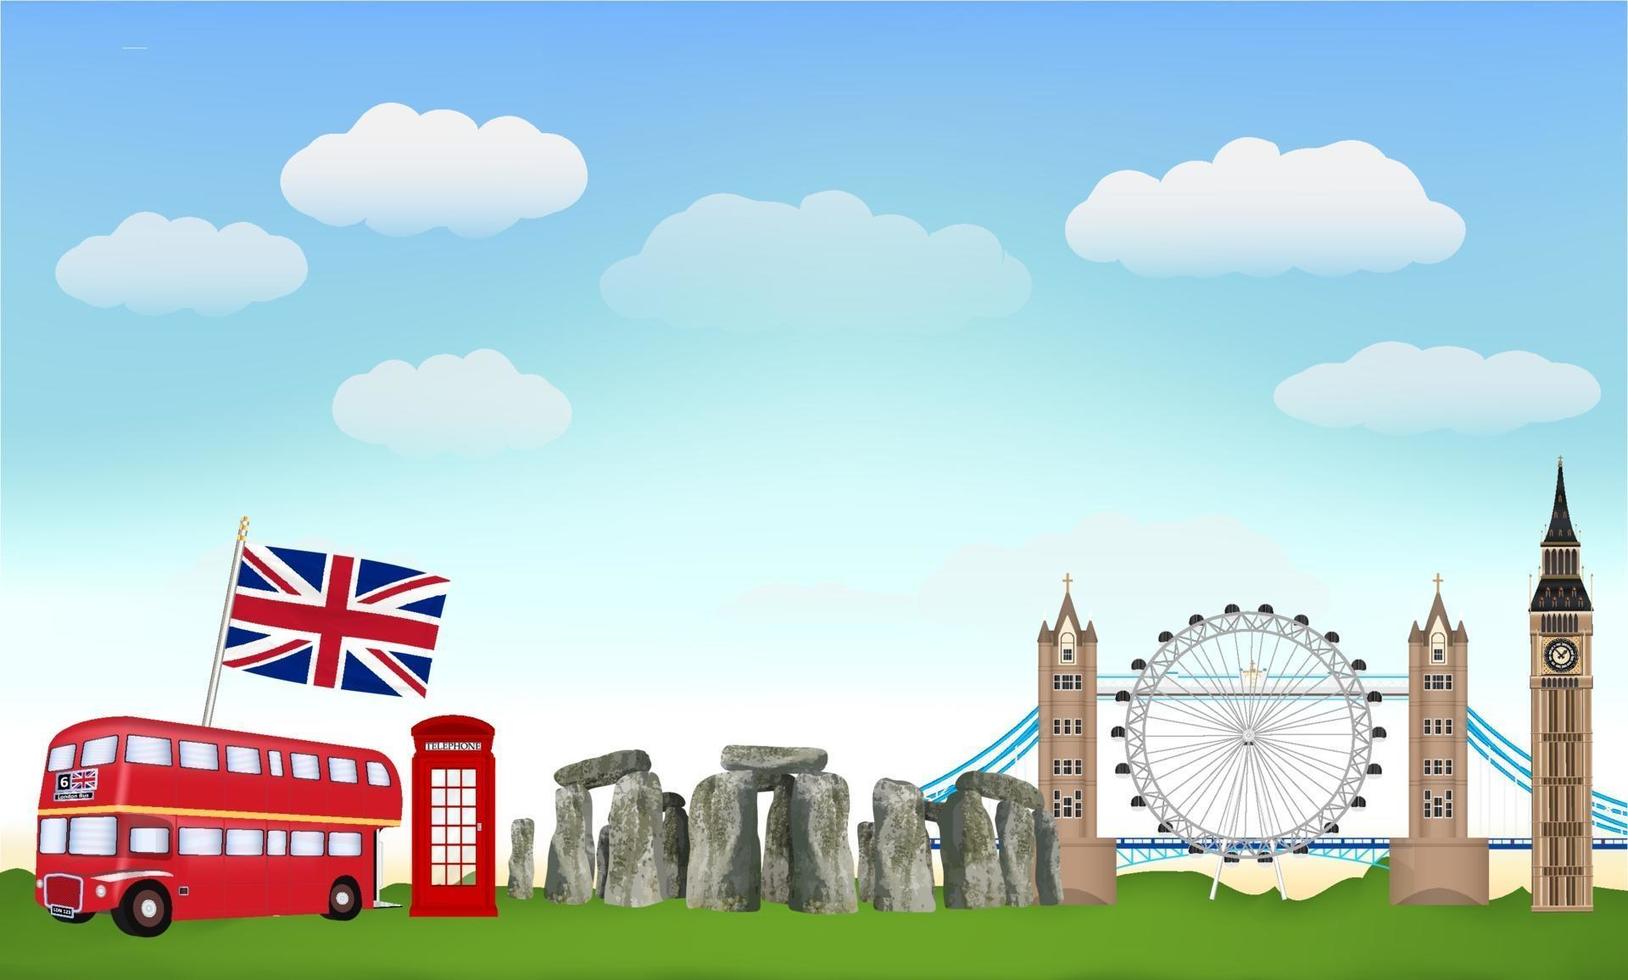 england travel with landmarks and icons vector